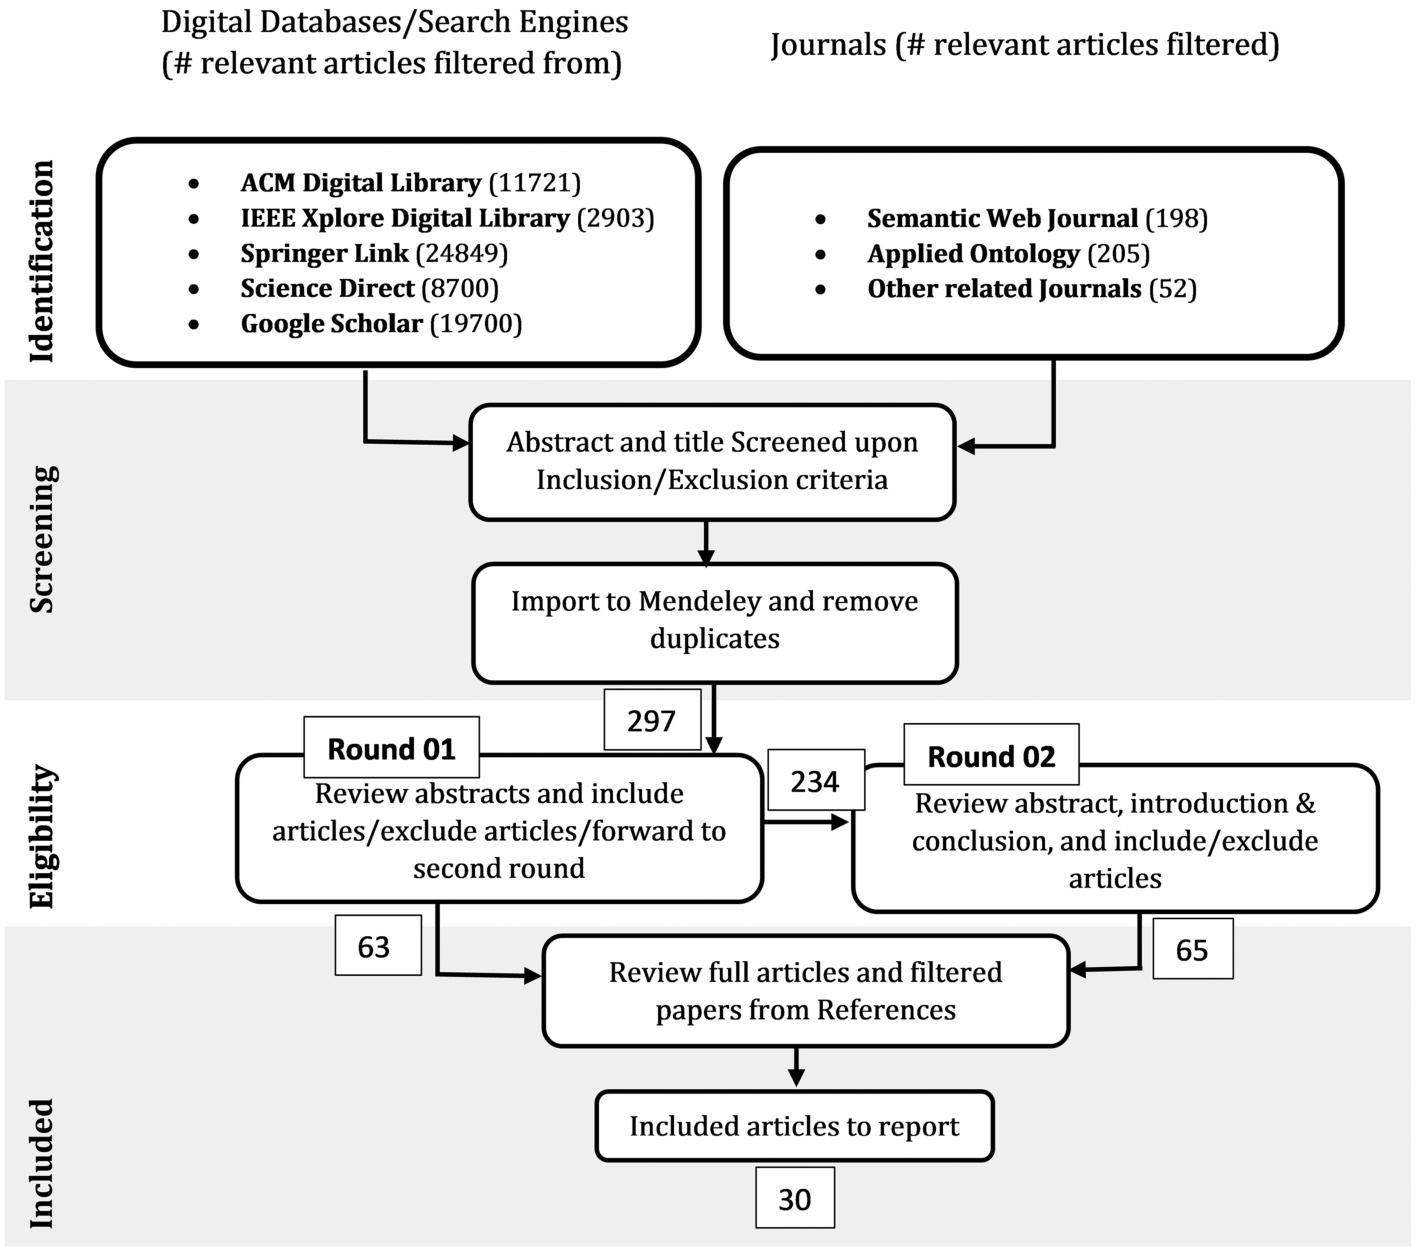 Main steps of the review process and number of articles retrieved.